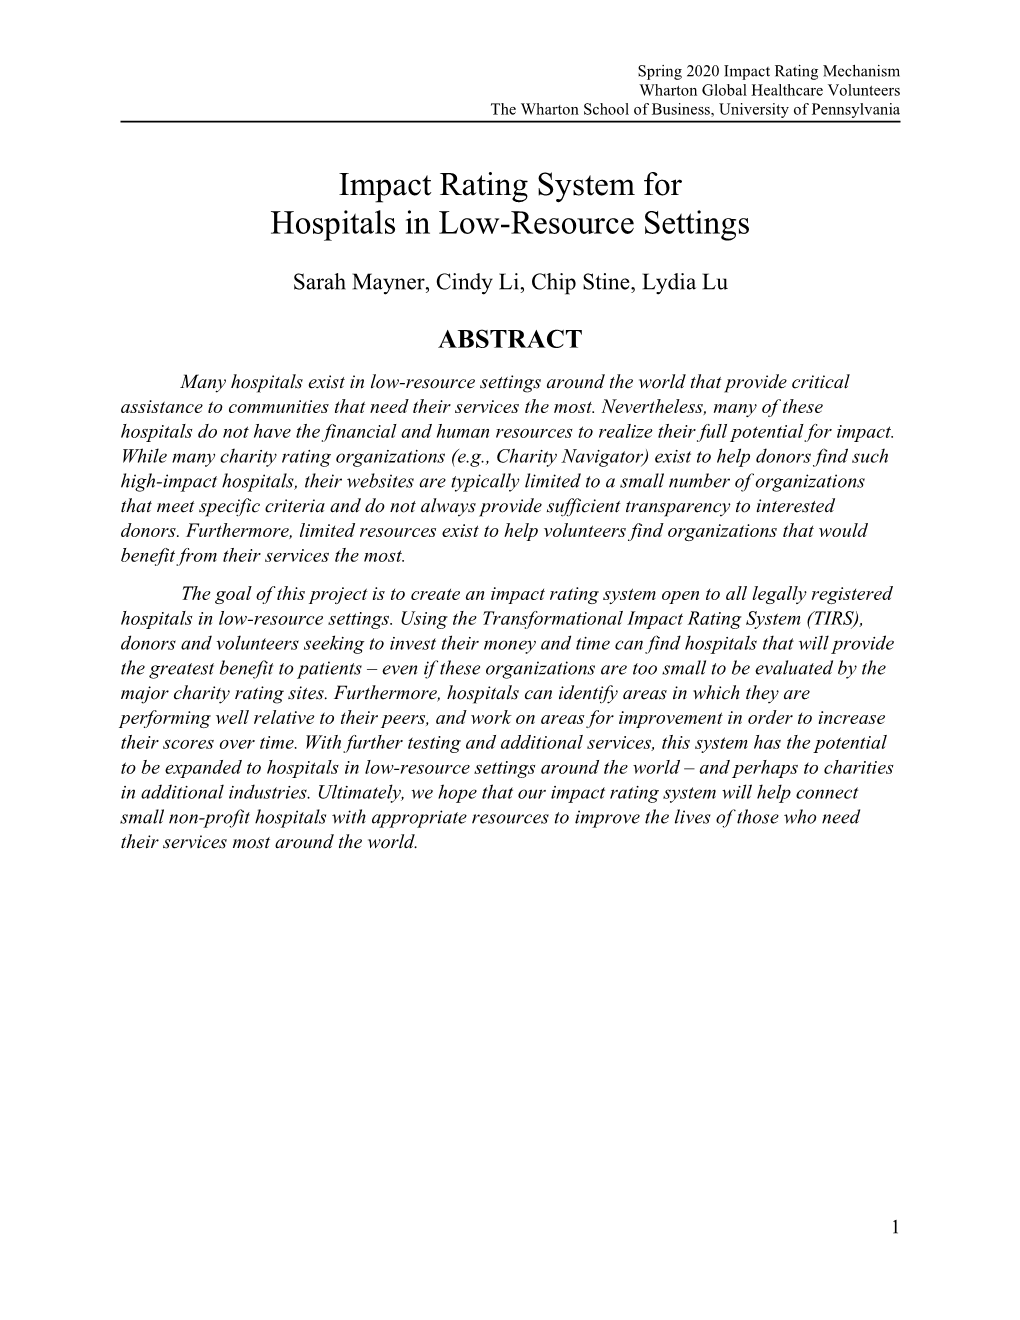 Impact Rating System for Hospitals in Low-Resource Settings